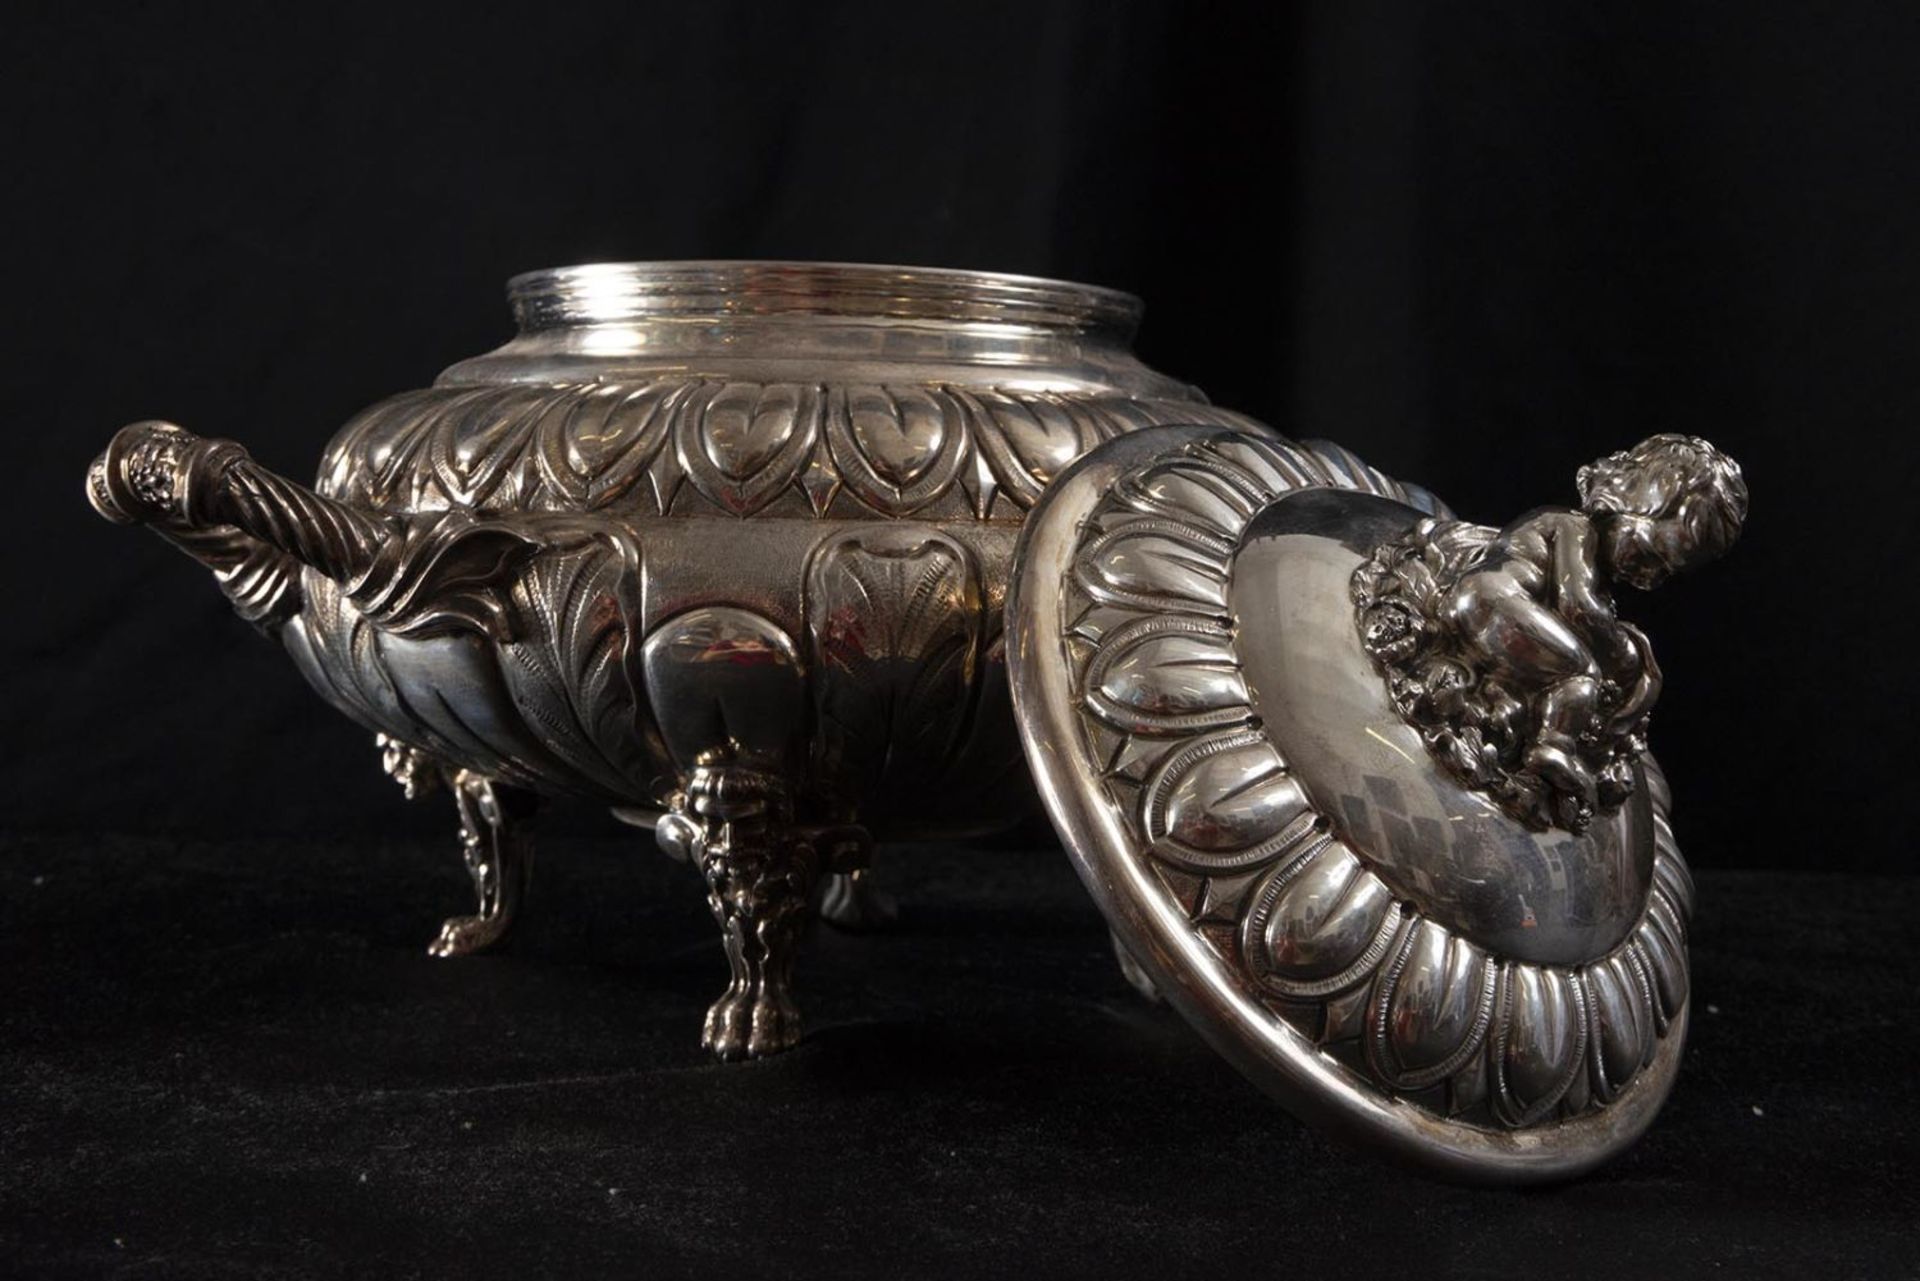 Elegant French tureen with Cherub-shaped lid and faun legs, 19th century, in 925 Sterling silver - Image 4 of 5